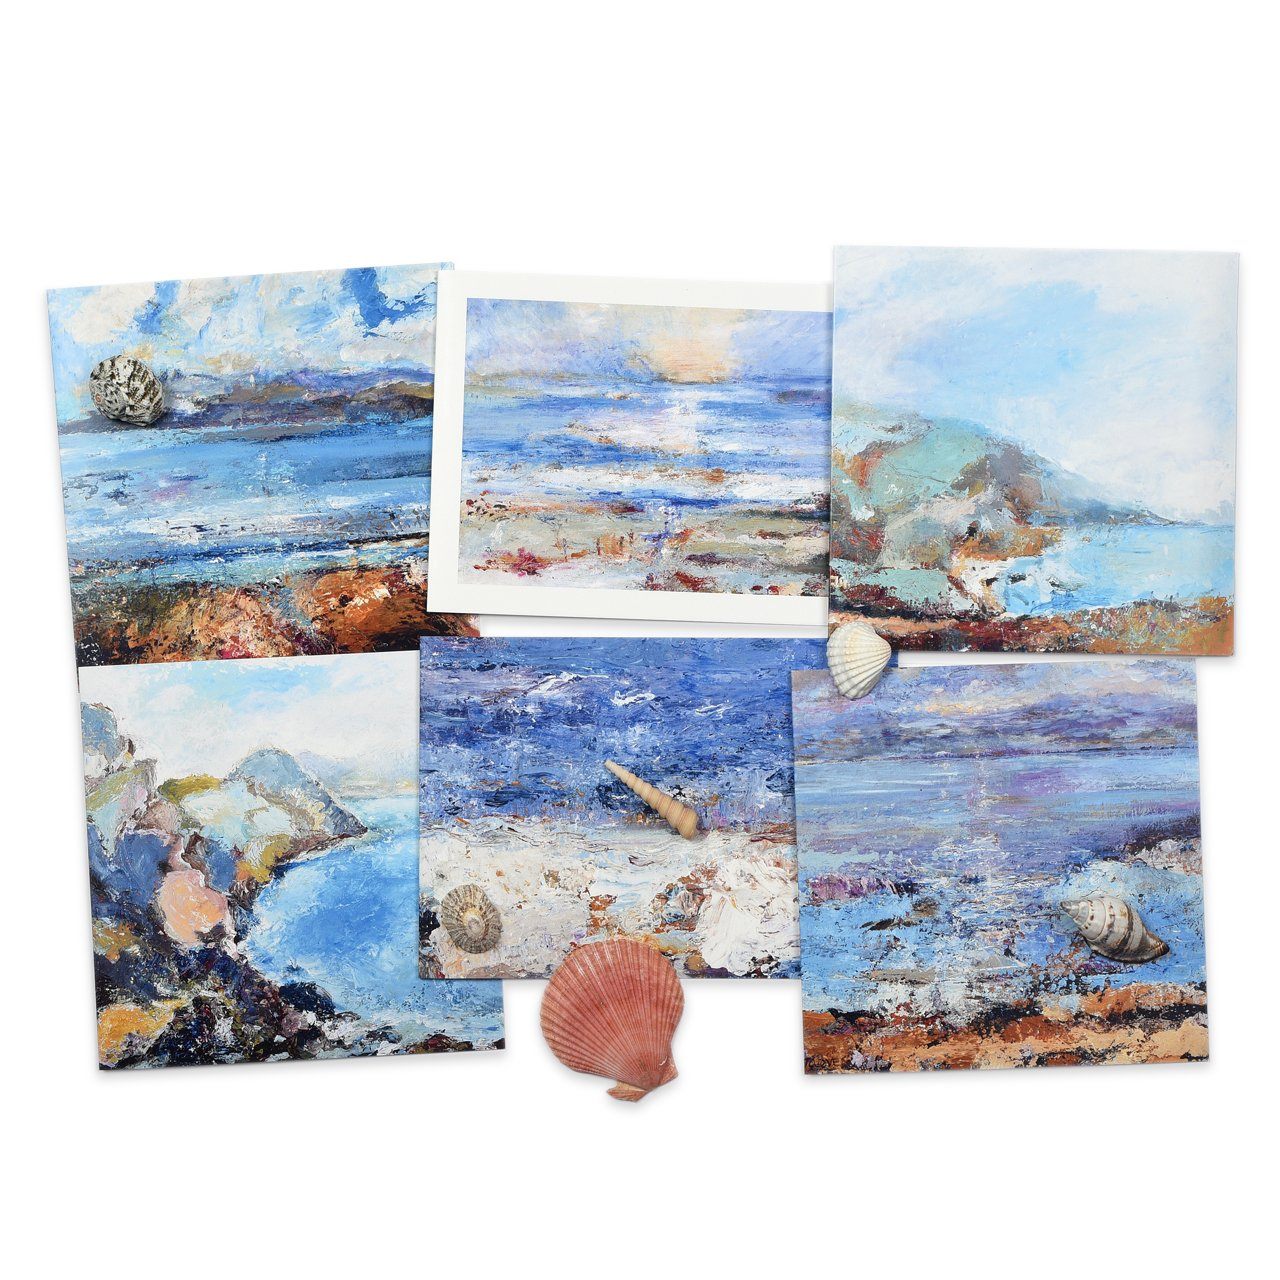 Landscape and Seascape Greeting Cards made from original art by UK Artist Judi Glover Art